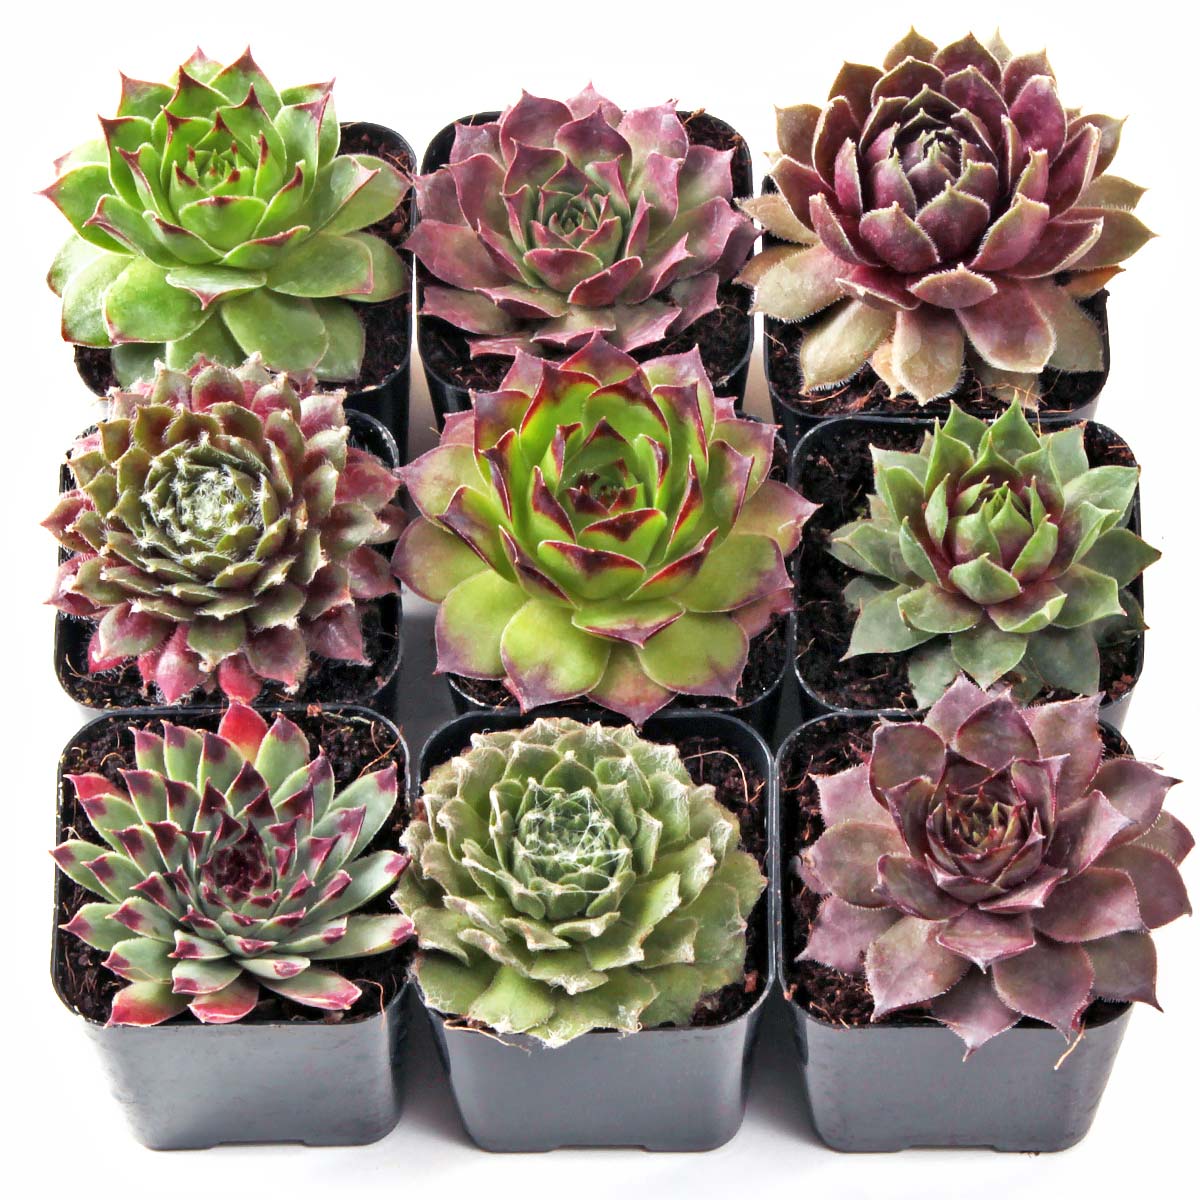 Do these succulents come with pots